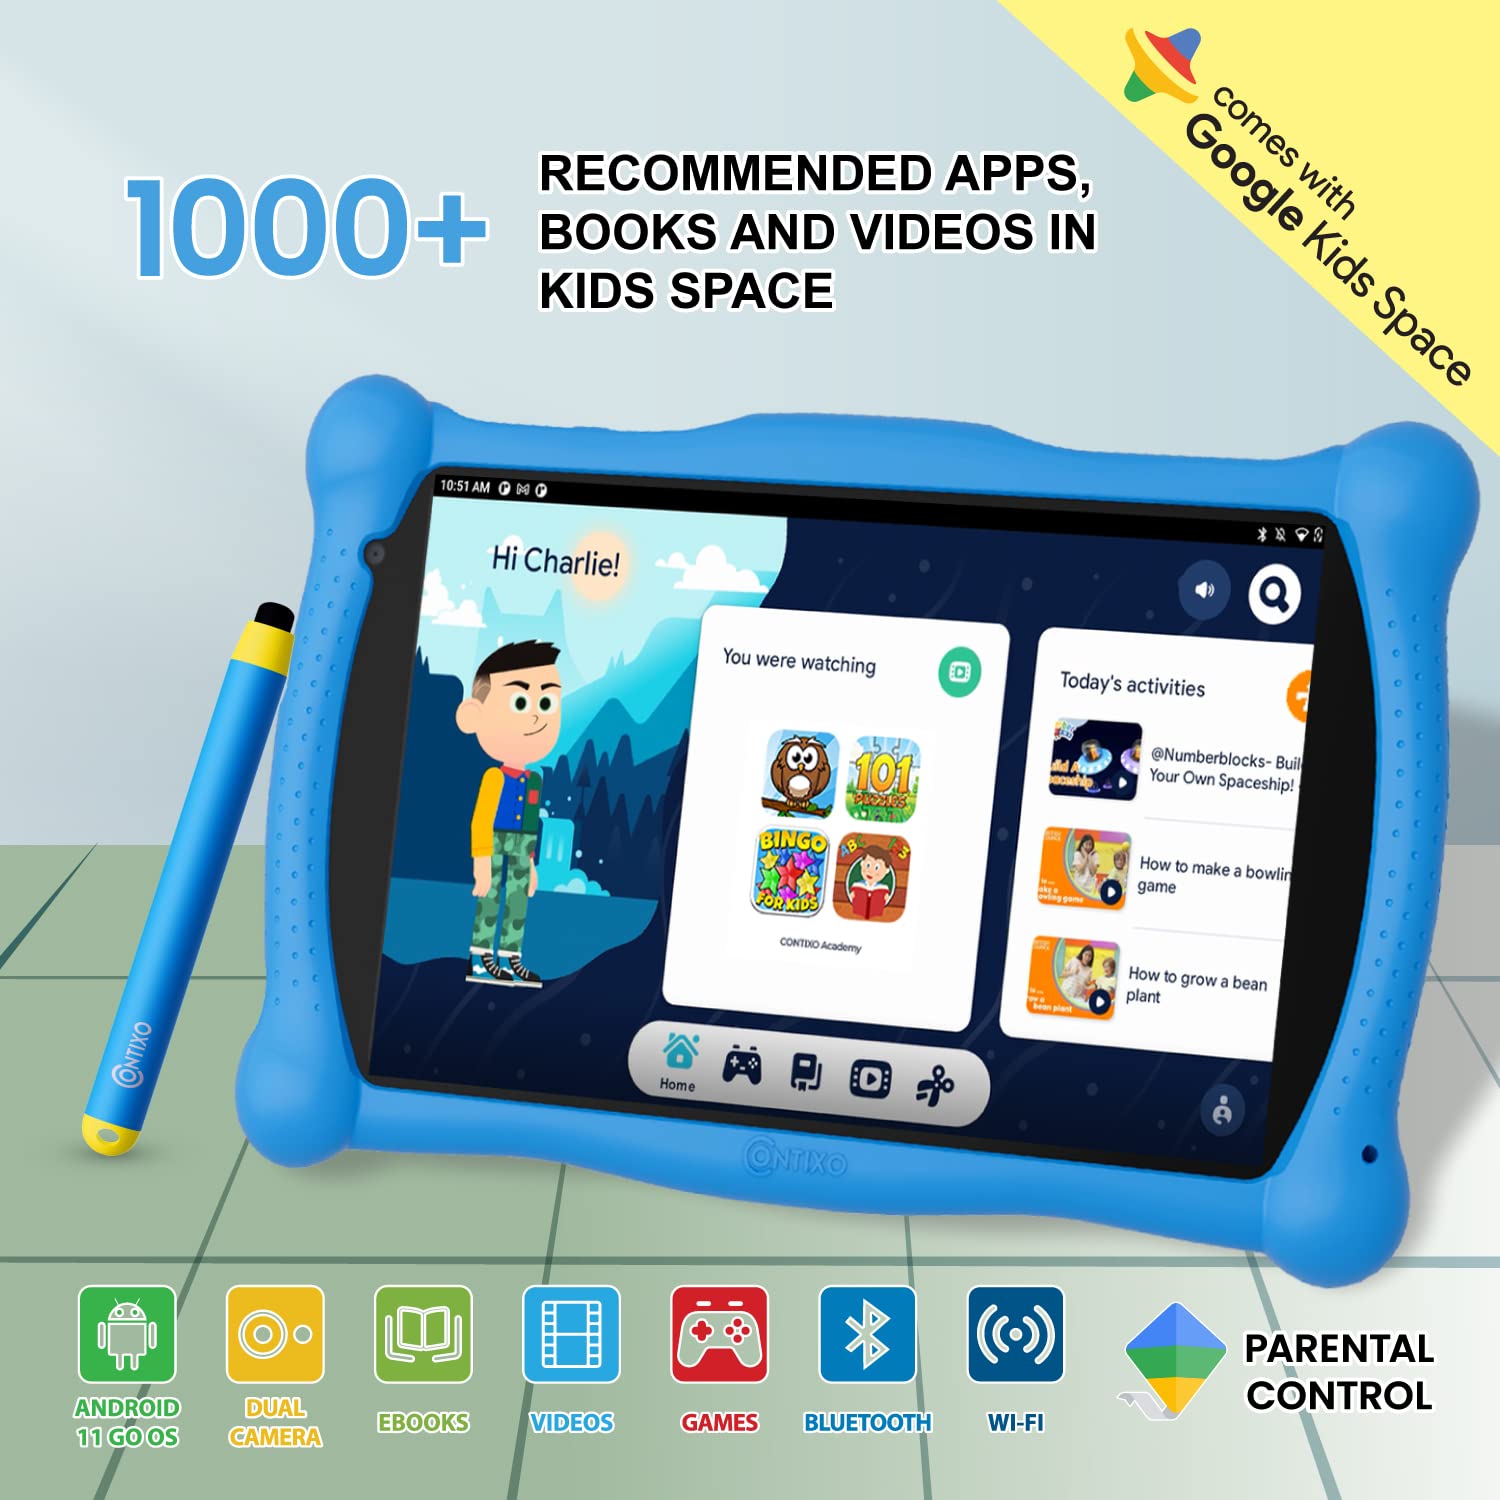 Contixo Kids Tablet V10, 7-inch HD, Ages 3-7, Toddler Tablet with Camera, Parental Control -16GB, WiFi, Learning Tablet for Children with Teacher's Approved Apps, Kid-Proof Case & Stylus, Blue